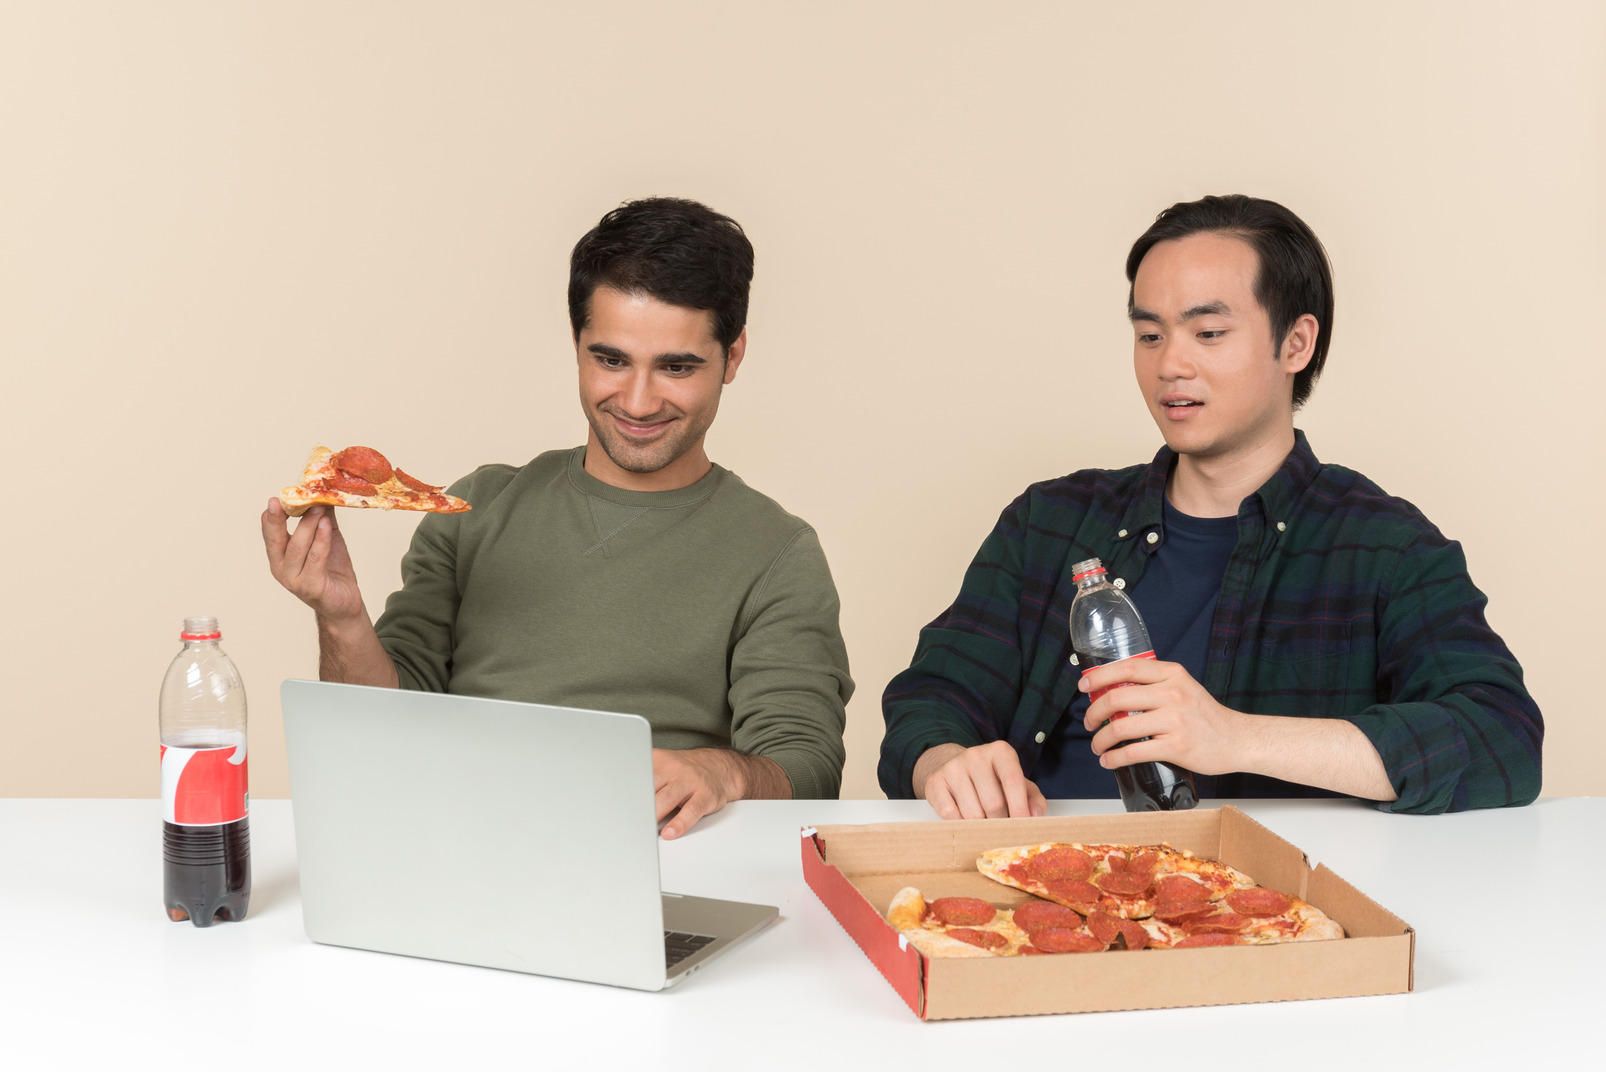 Interracial friends eating junk food and watching movie on laptop